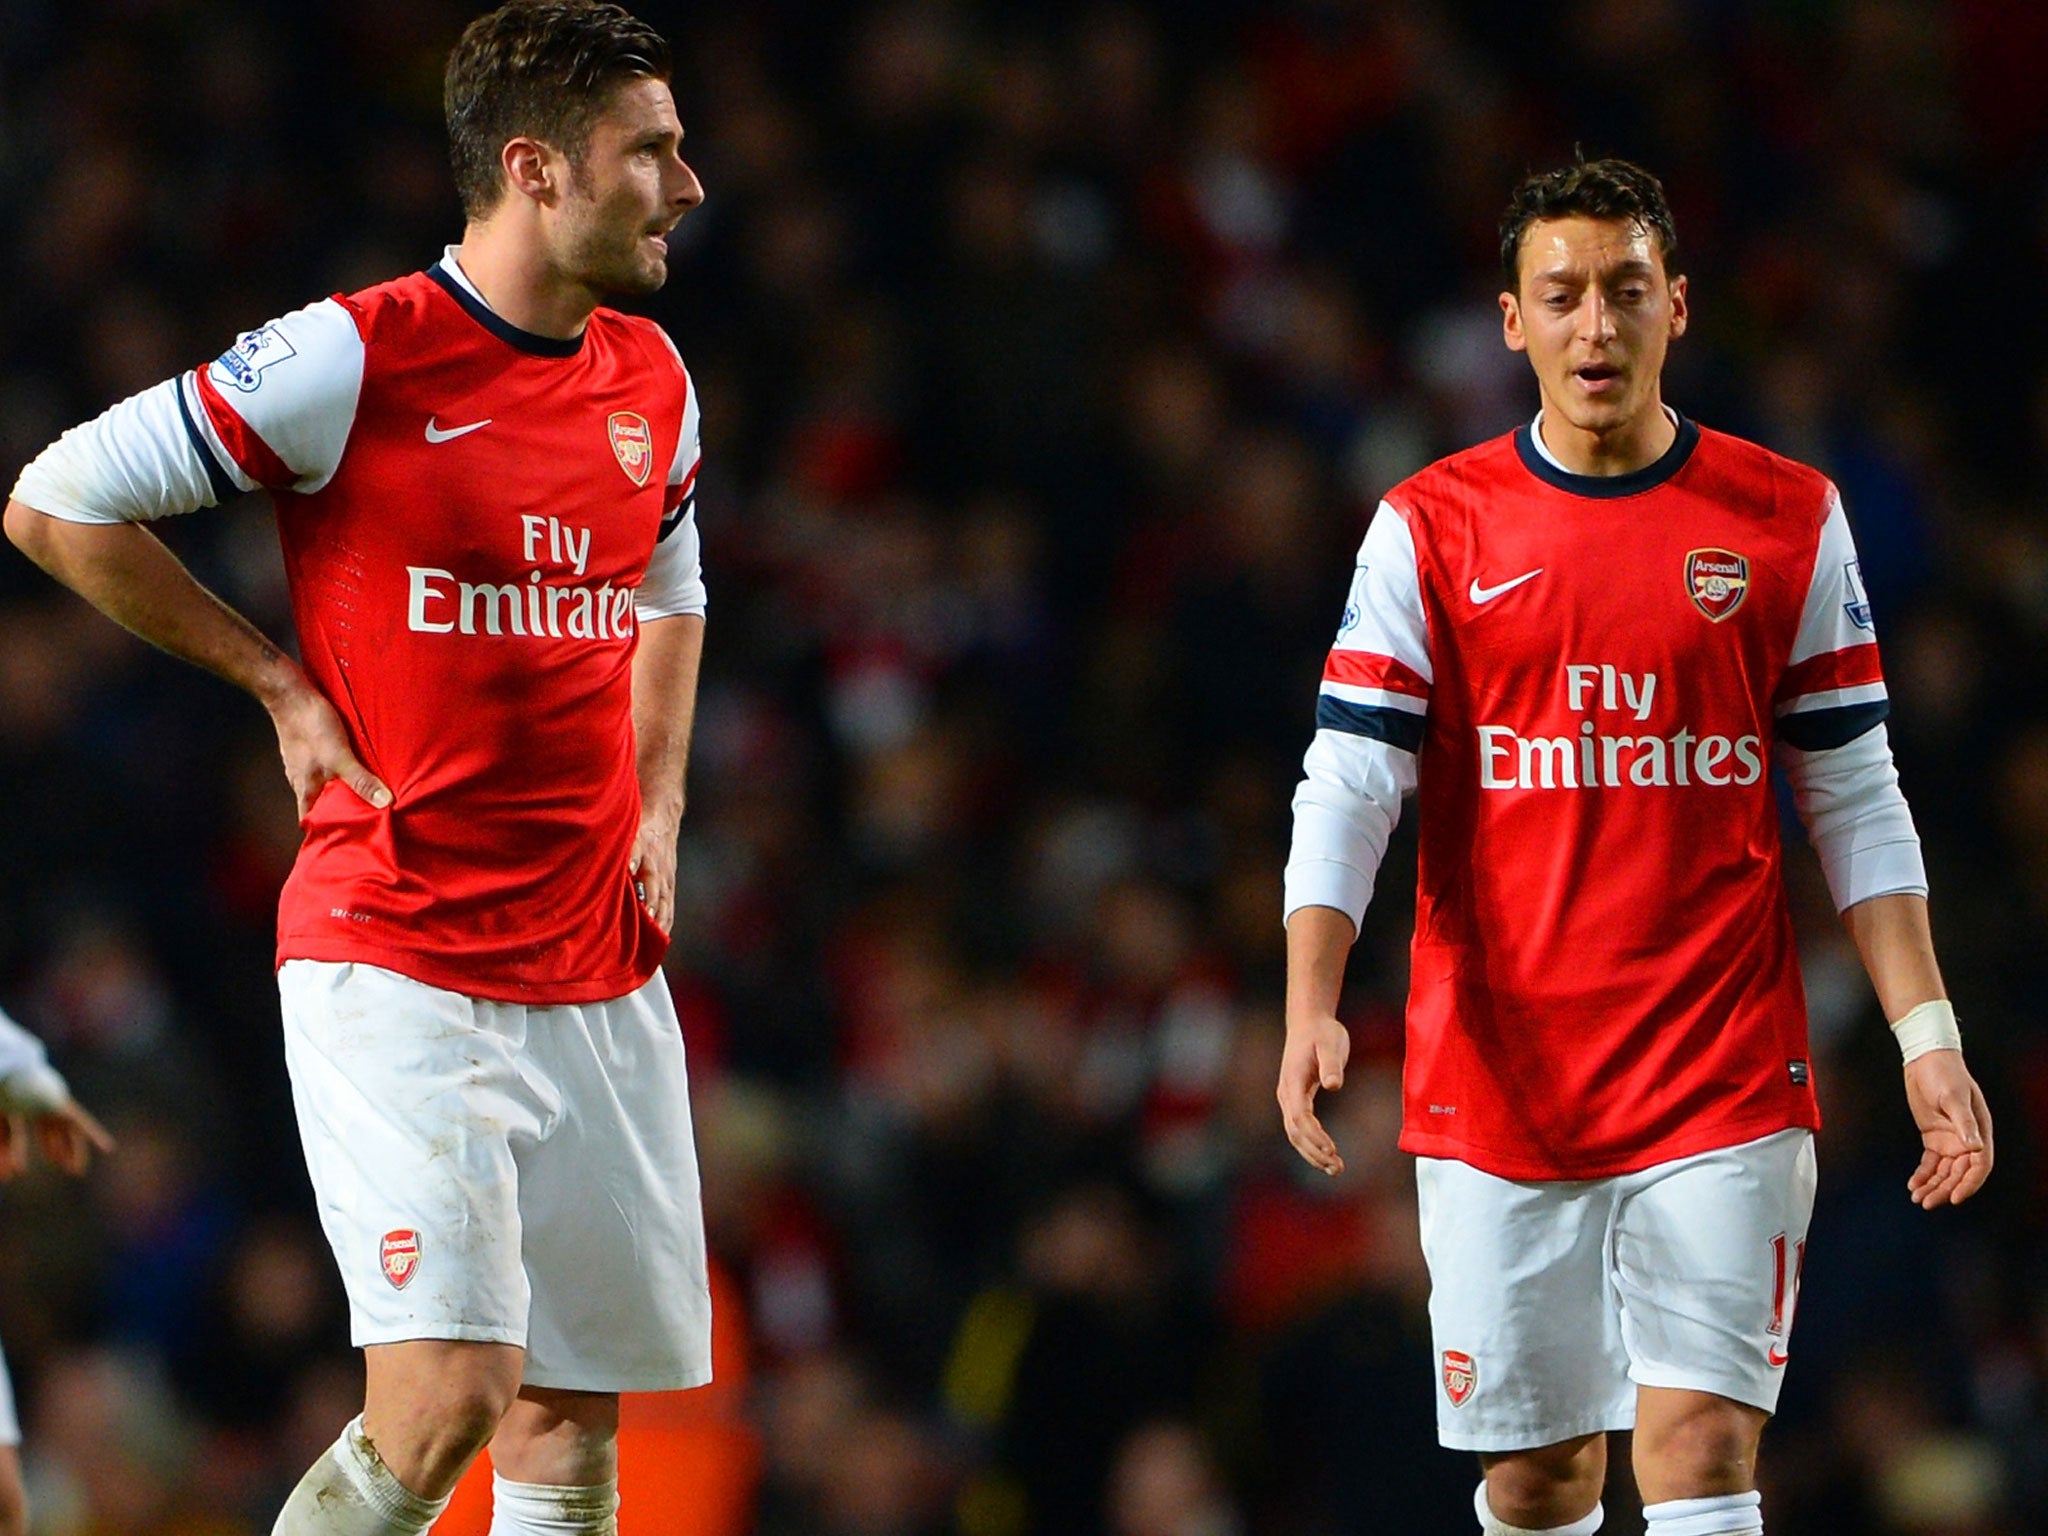 Olivier Giroud (left) and Mesut Ozil are doubtful for the Tottenham fixture on Saturday